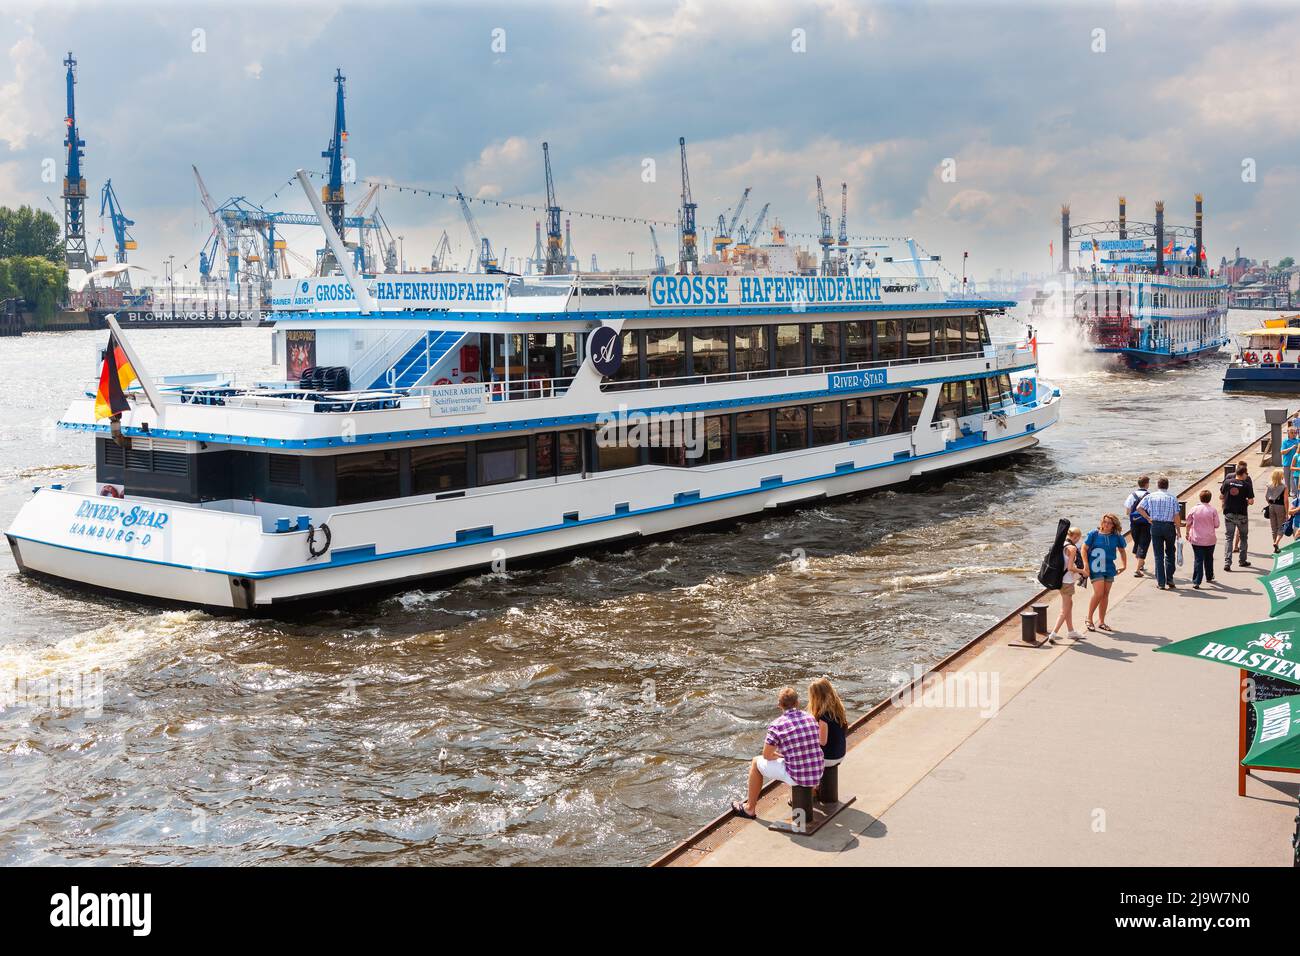 Hamburg, Germany - July 12, 2011 : Hamburg Harbor. Tour boats and passengers waiting for tour boats along the Elbe River in mid summer. Stock Photo